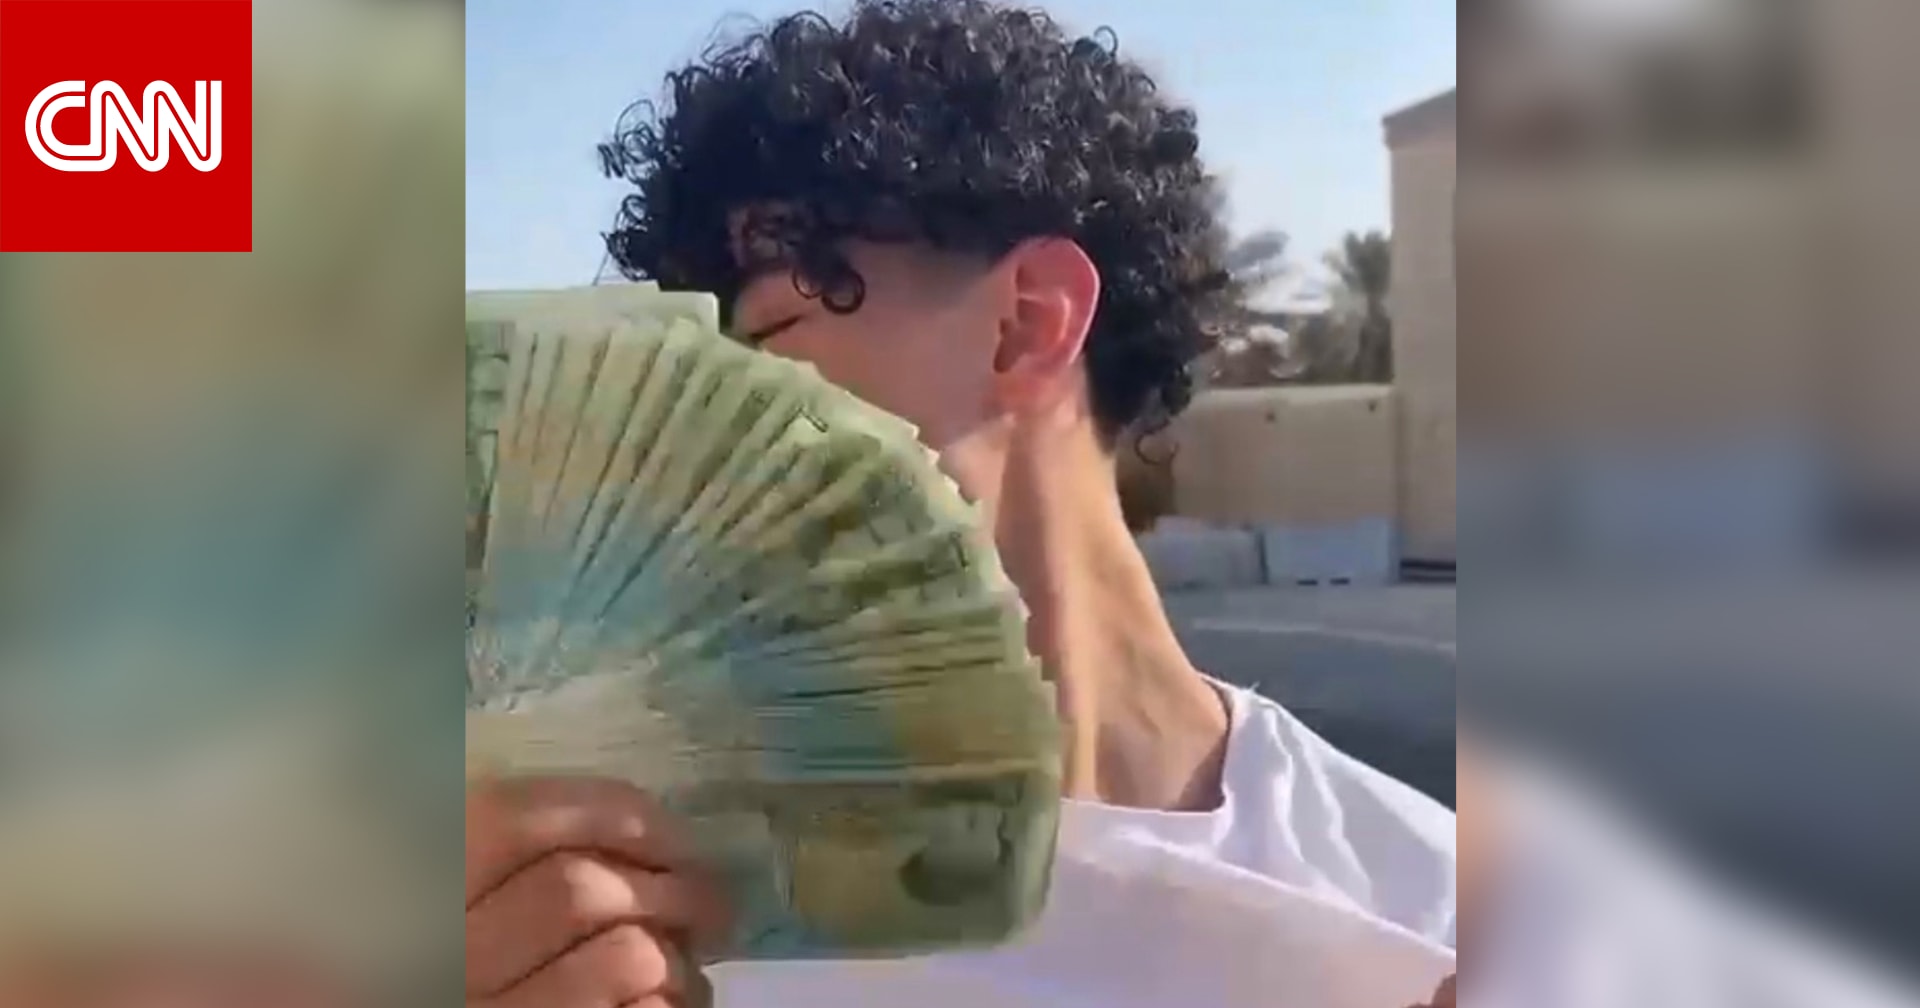 Qatar .. Authorities have arrested a person who appeared in a video clip “offensive” to the national currency